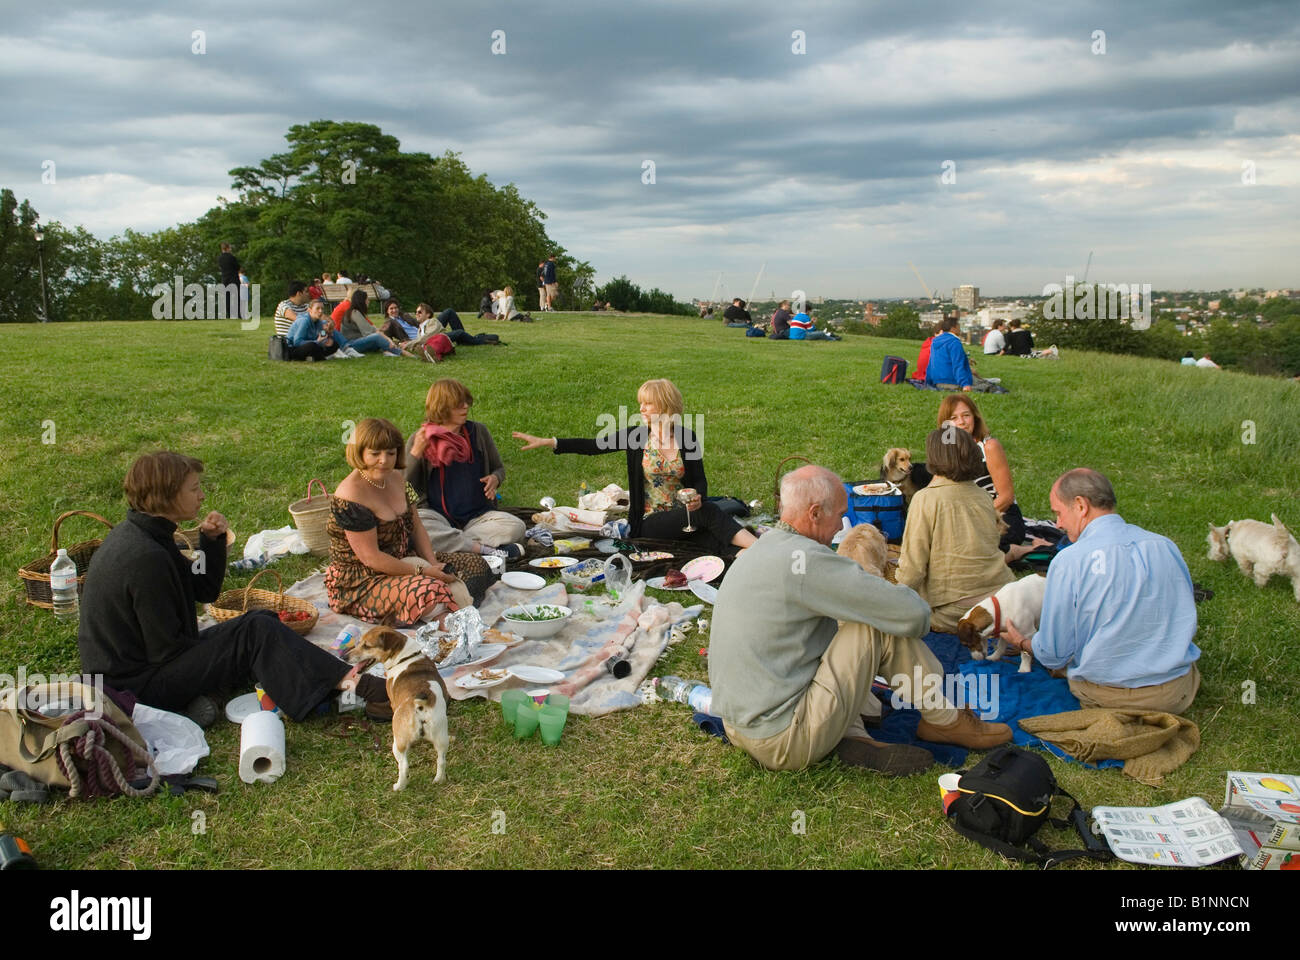 Dog owners summers evening alfresco picnic, Primrose Hill London skyline Middle aged Londoners having a get together. UK 2008 2000s HOMER SYKES Stock Photo